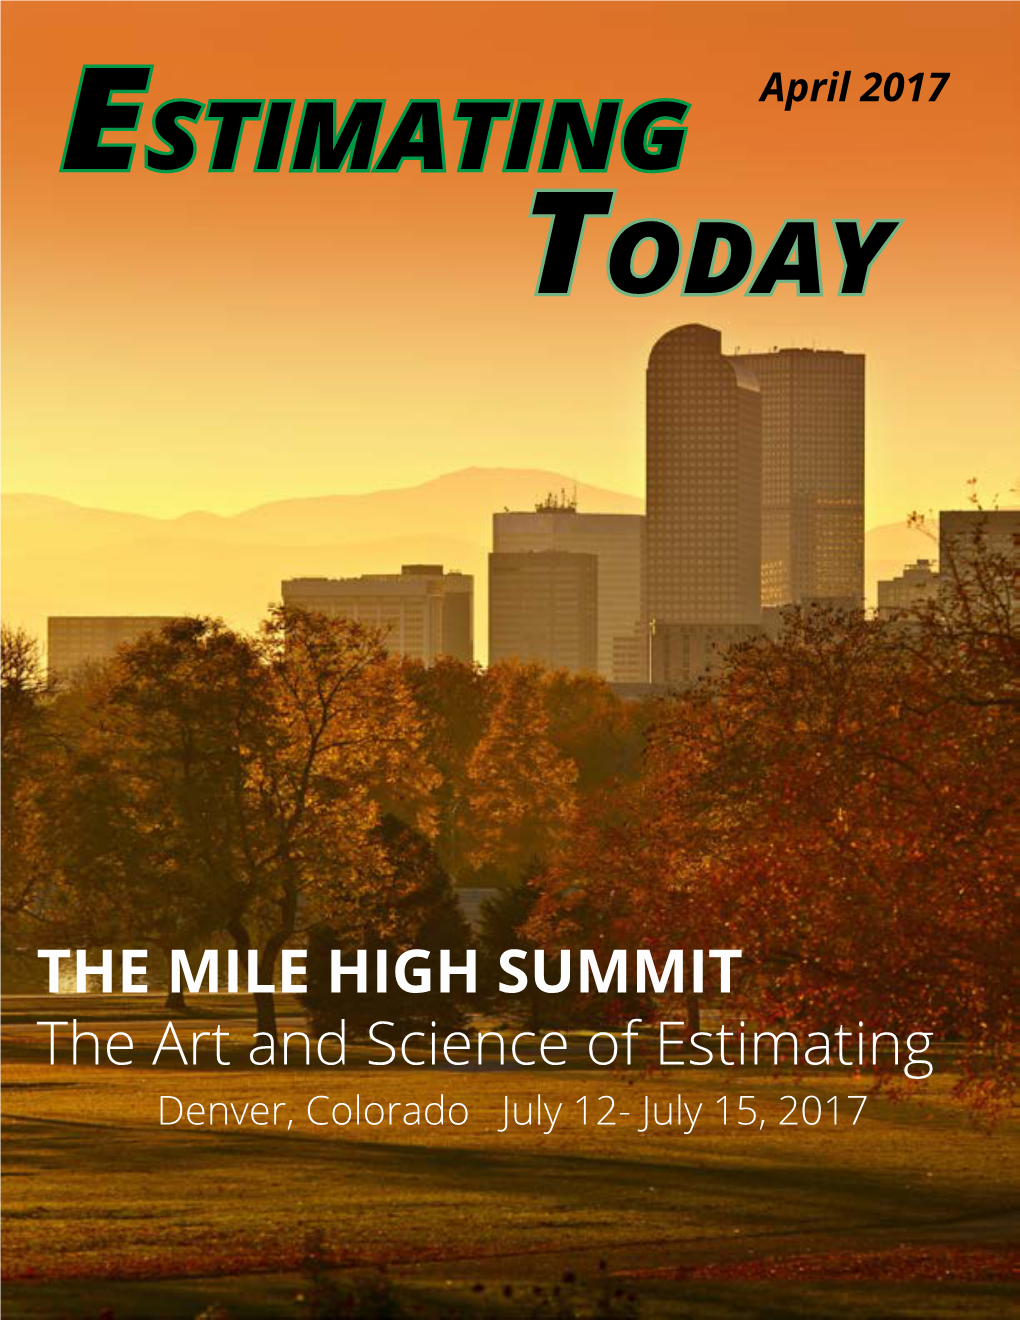 THE MILE HIGH SUMMIT the Art and Science of Estimating Denver, Colorado July 12- July 15, 2017